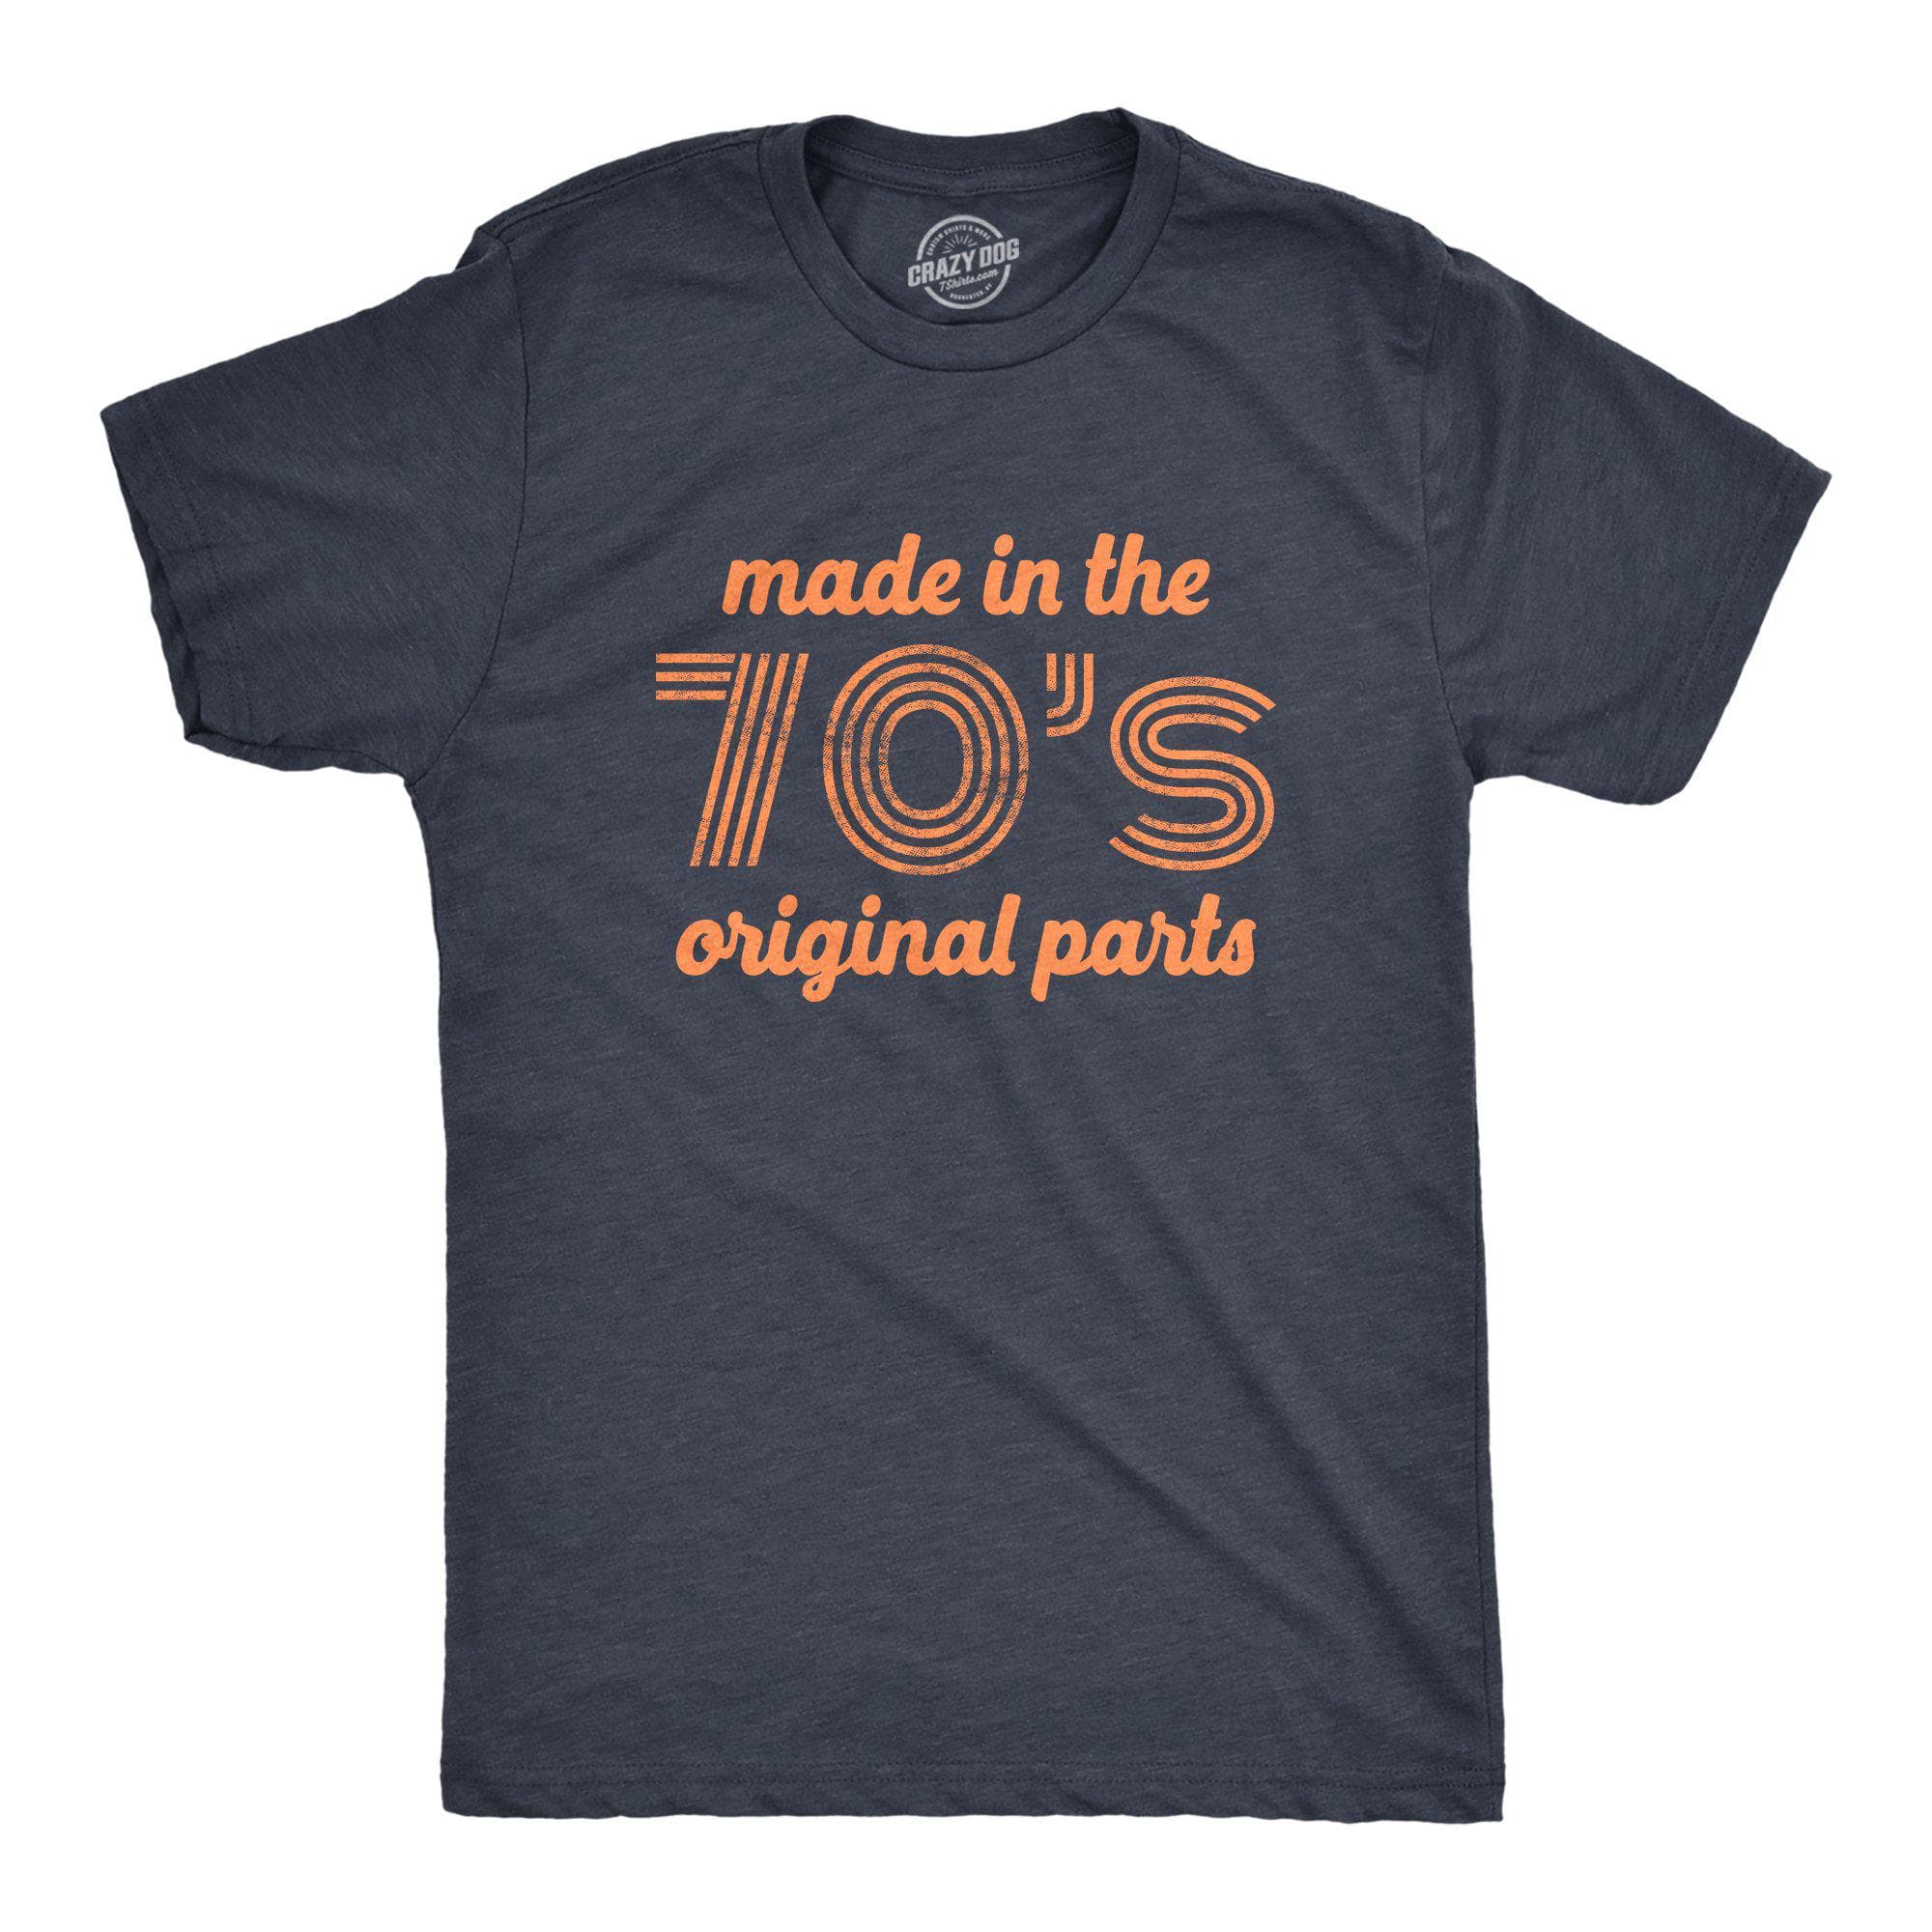 Made In The 70s Original Parts Men's Tshirt - Crazy Dog T-Shirts